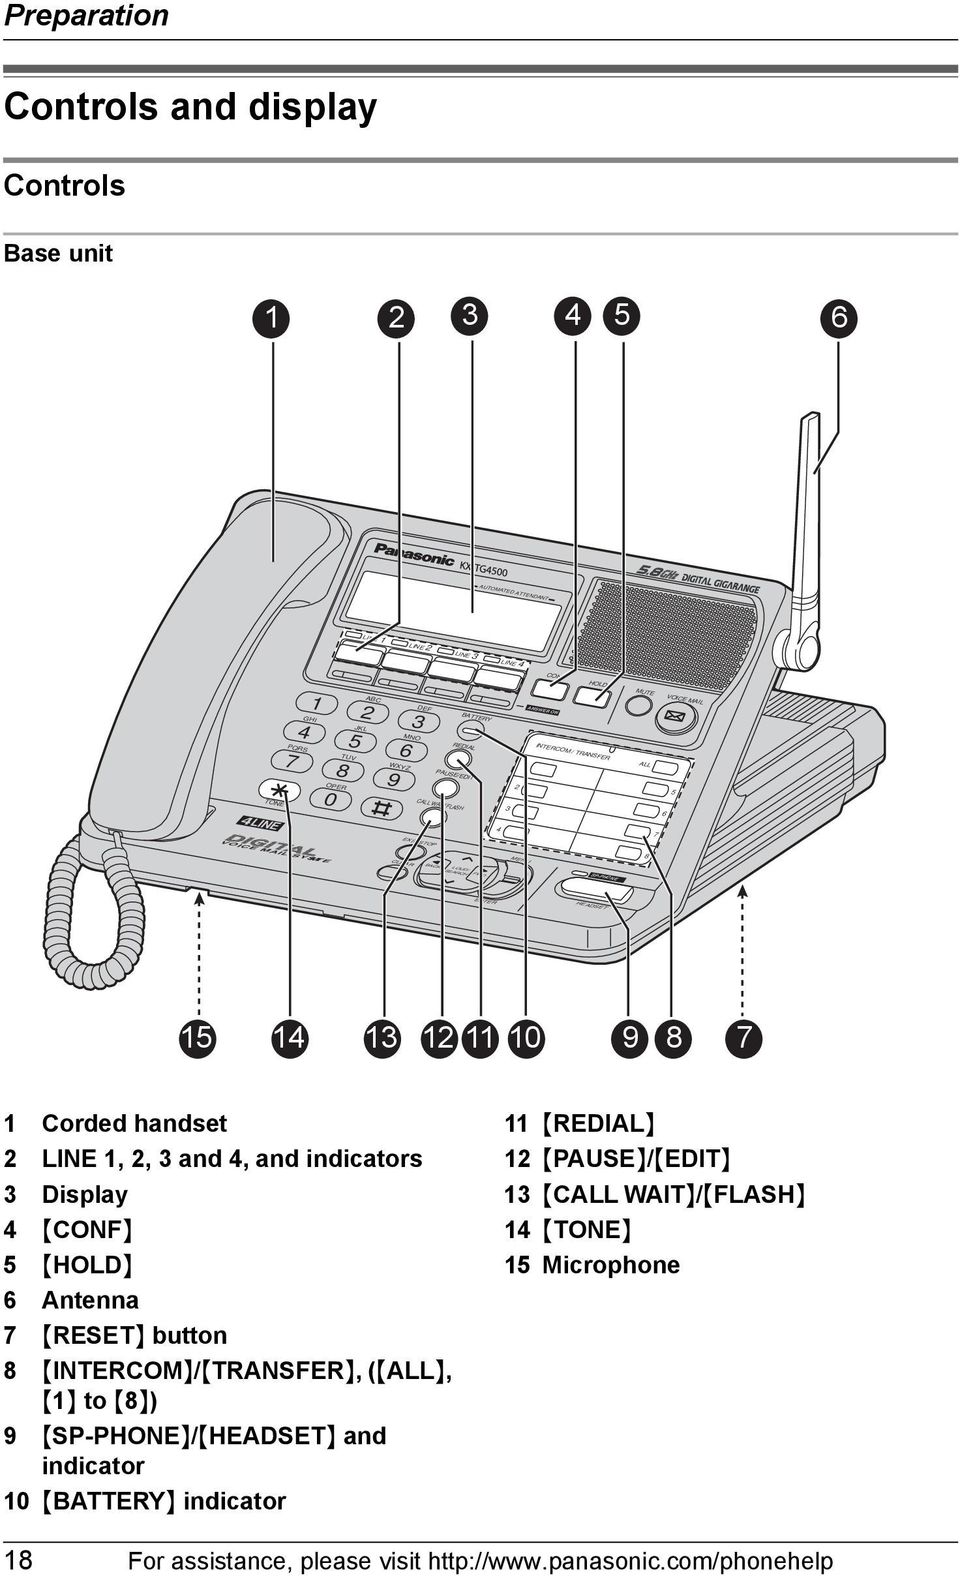 8 15 14 13 12 11 10 9 8 7 1 Corded handset 2 LINE 1, 2, 3 and 4, and indicators 3 Display 4 {CONF} 5 {HOLD} 6 Antenna 7 {RESET} button 8 {INTERCOM}/{TRANSFER}, ({ALL}, {1} to {8}) 9